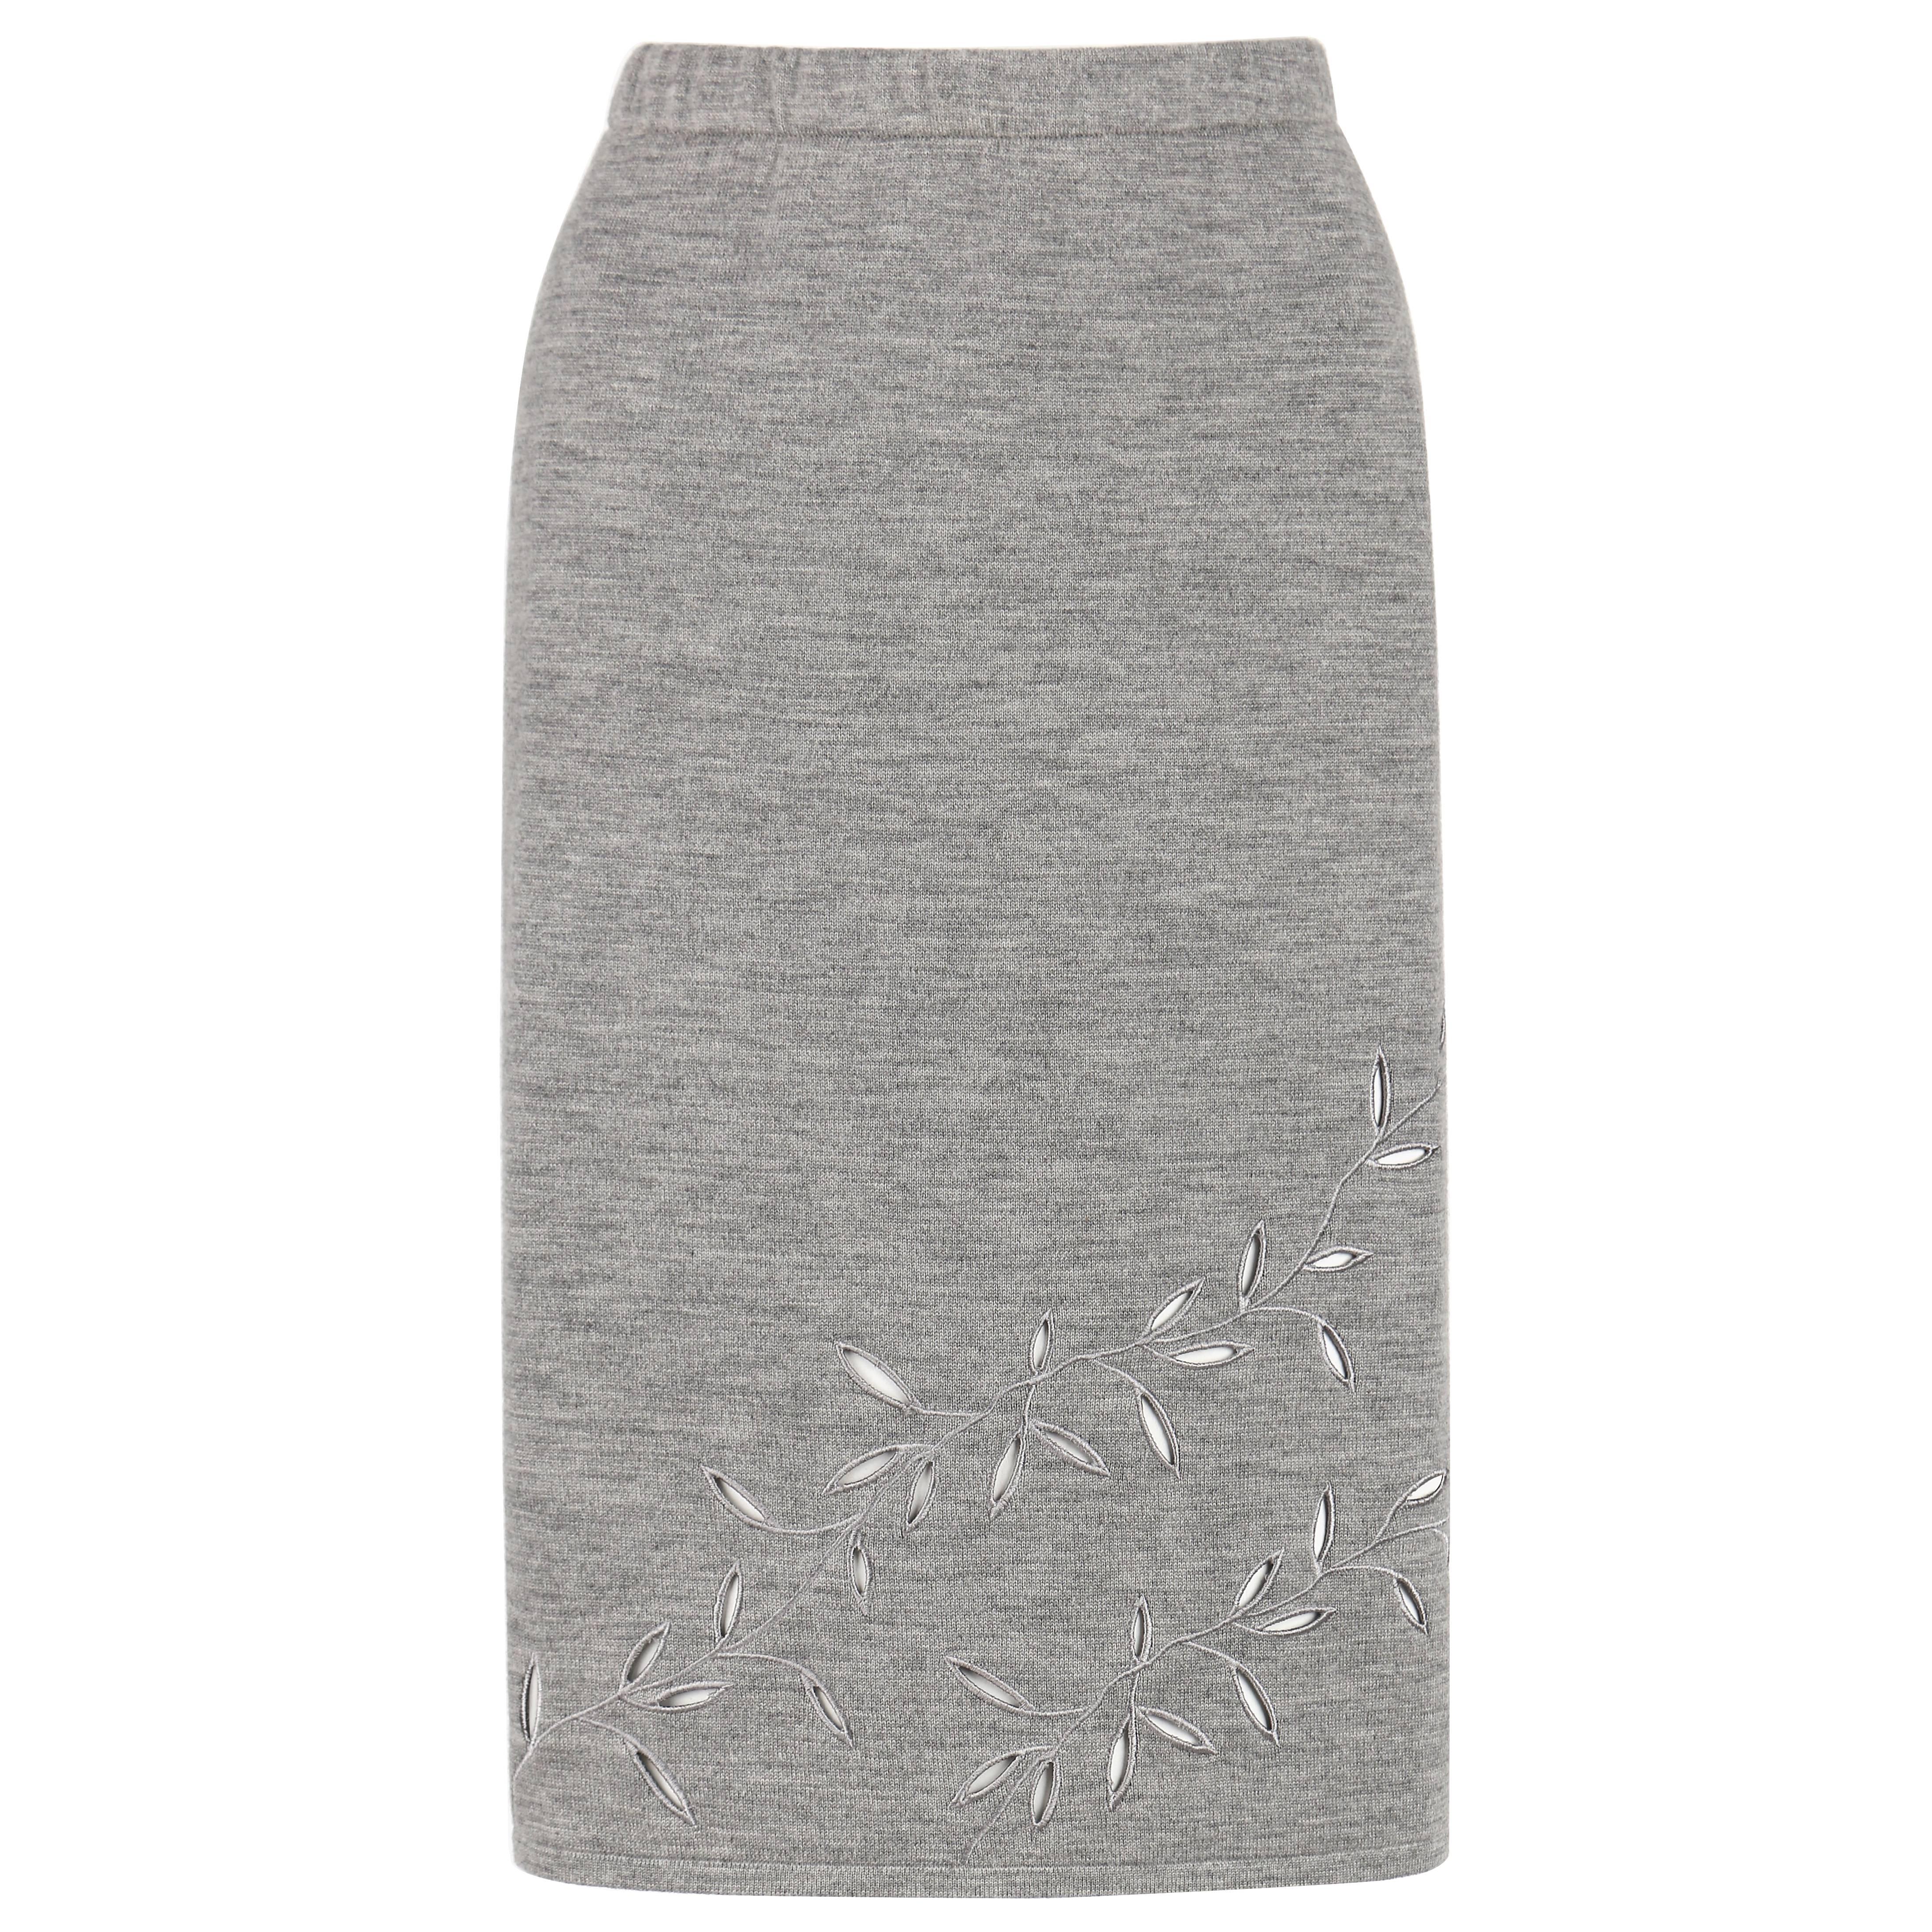 GIVENCHY COUTURE A/W 1998 ALEXANDER McQUEEN Gray Cut Work Knit Pencil Skirt